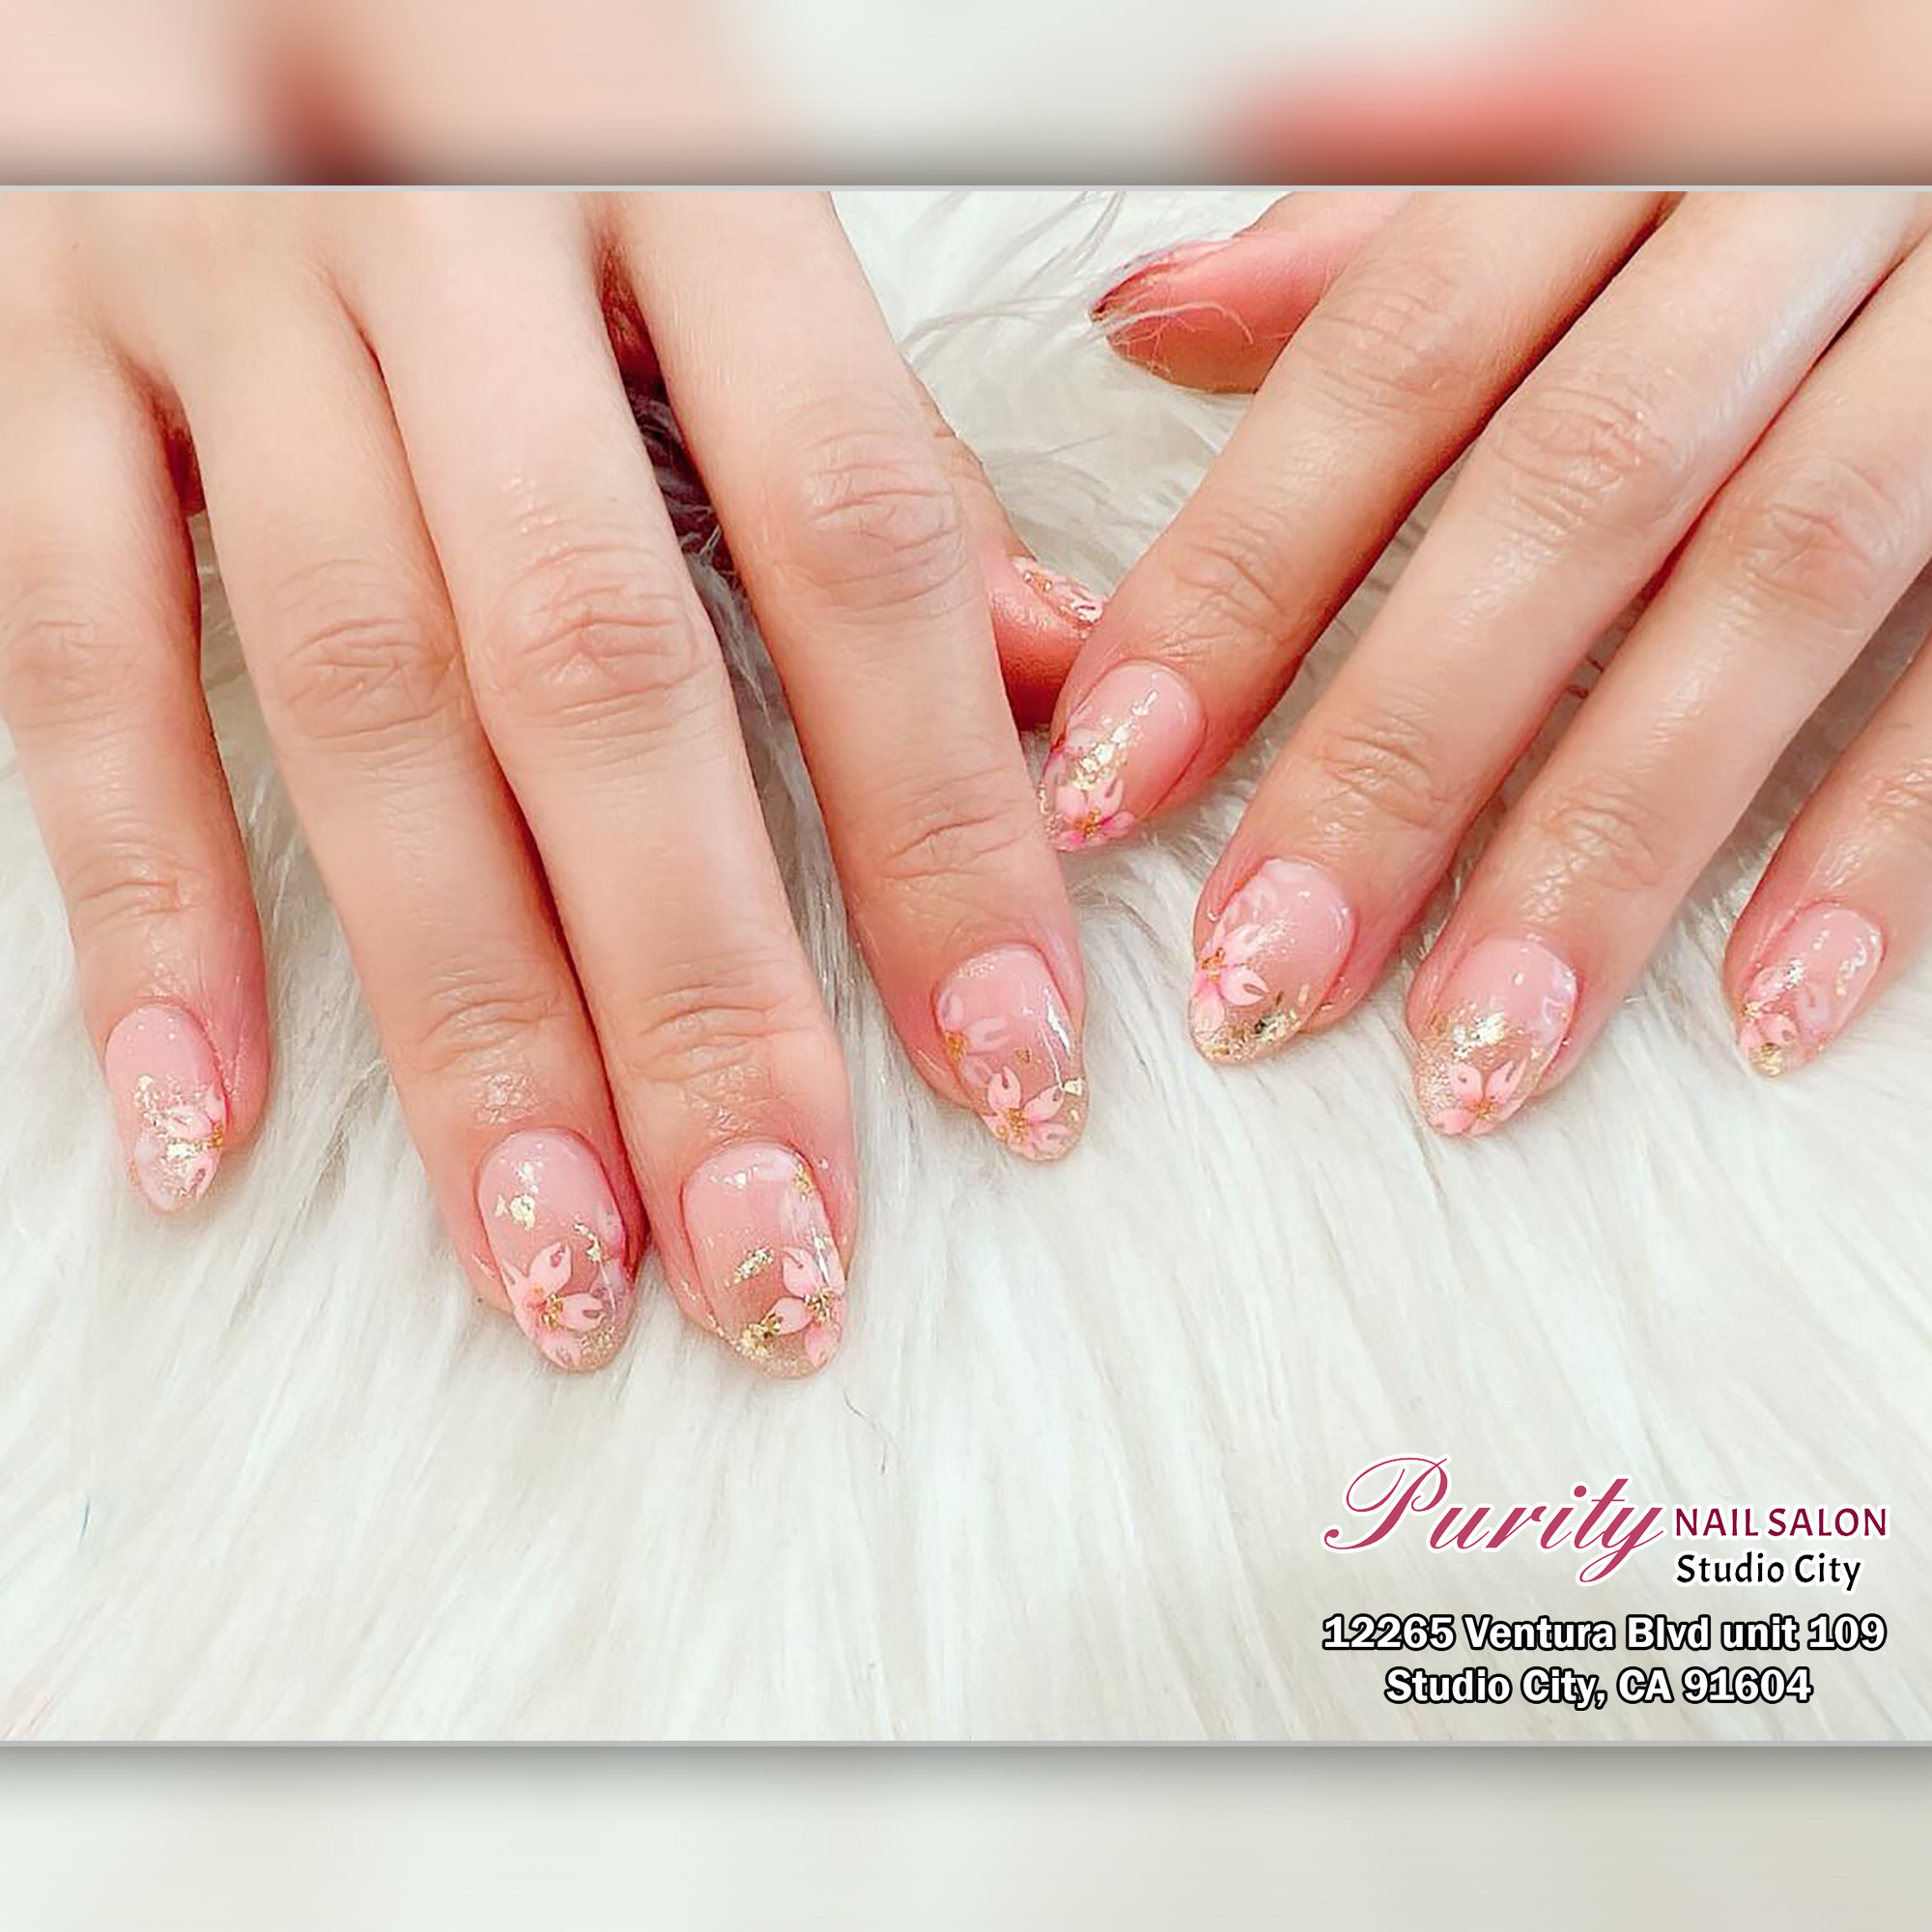 Purity Nail Salon, Studio City: Try out these 2023 nails art trends